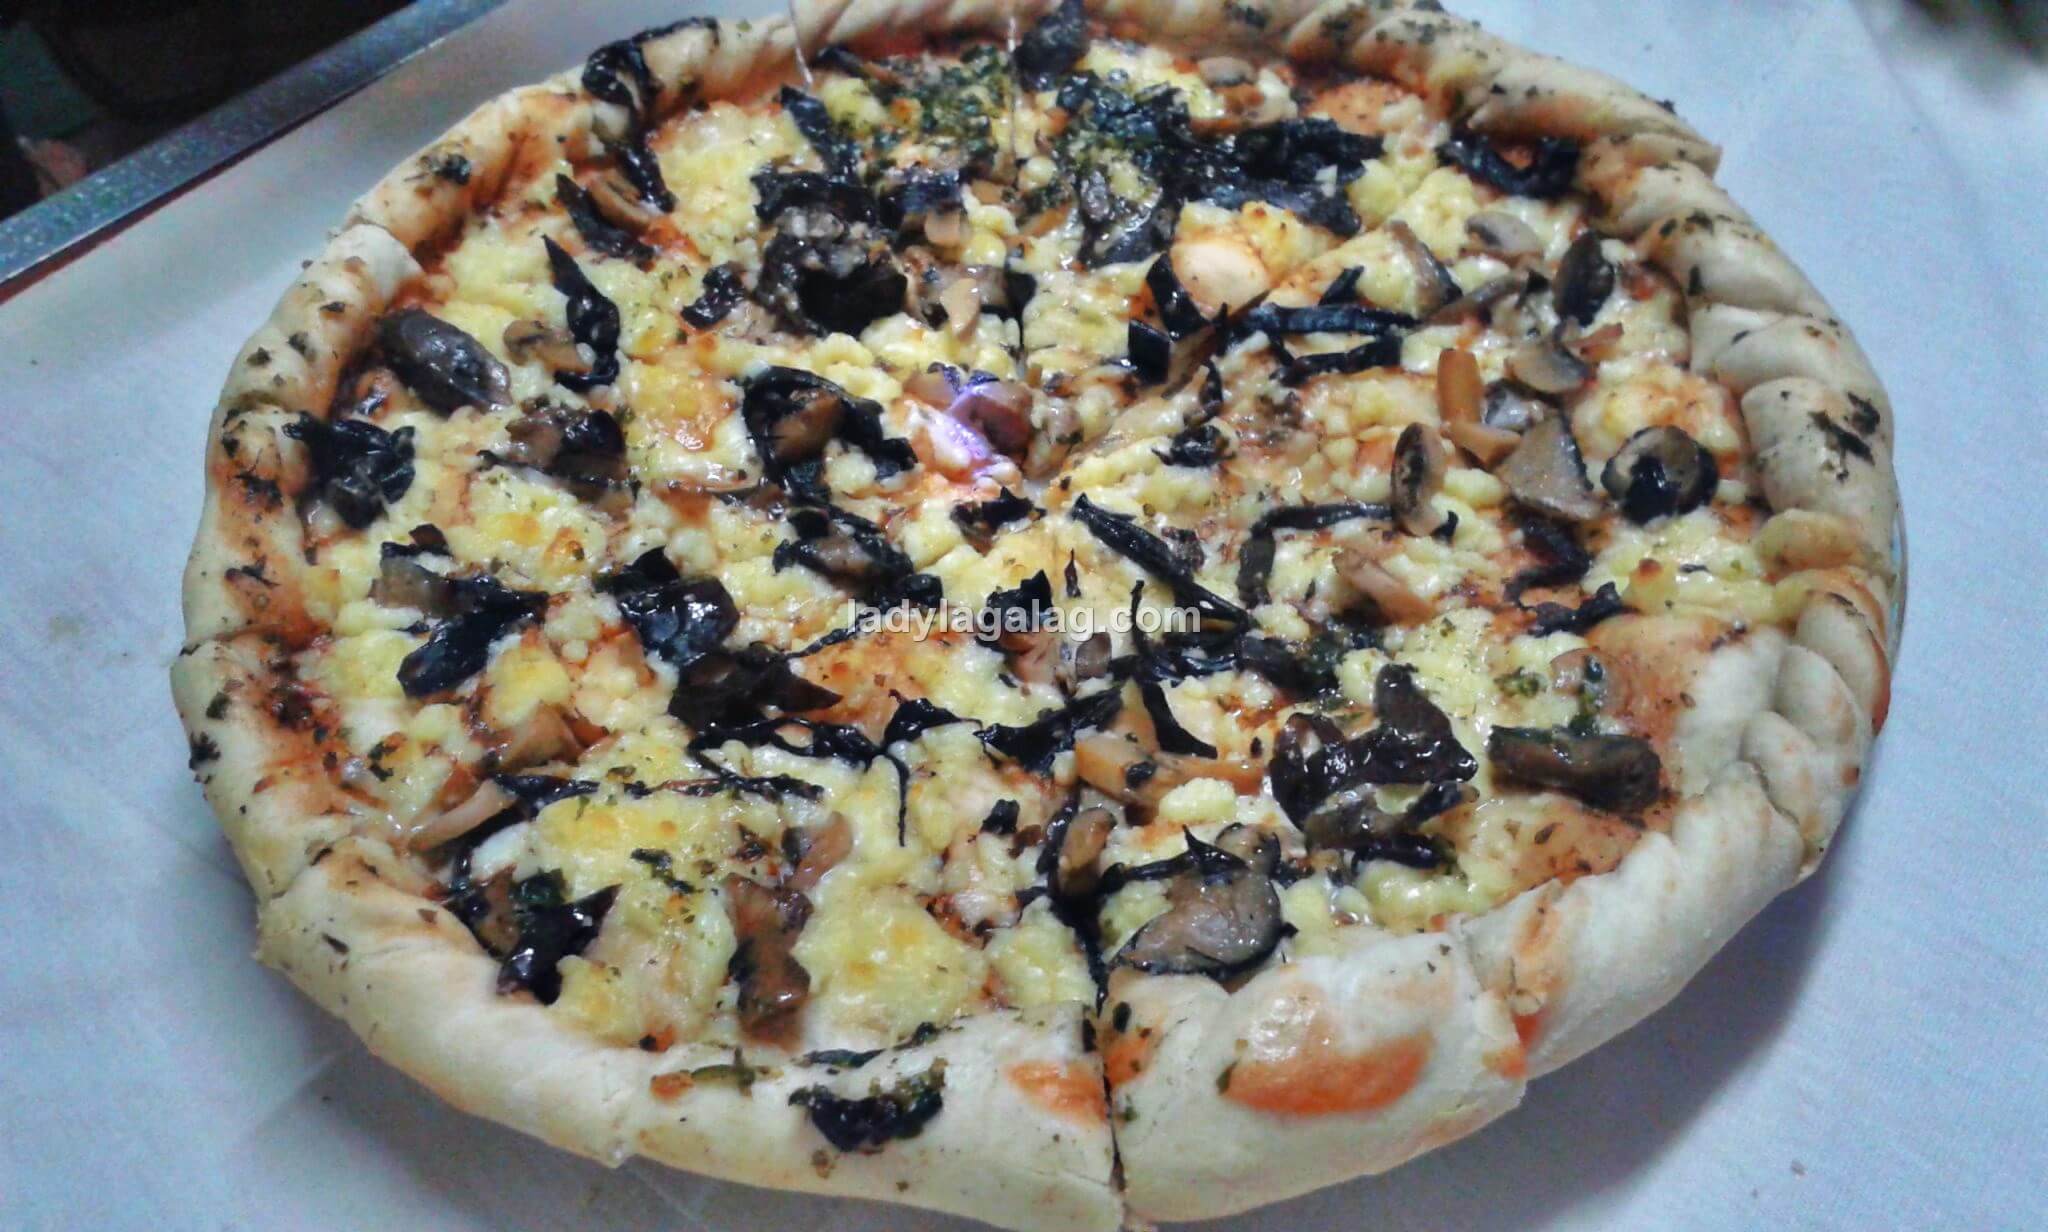 Chef Arnold’s Pizza, a pizza shop in Mandaluyong that offers wild mushroom as toppings